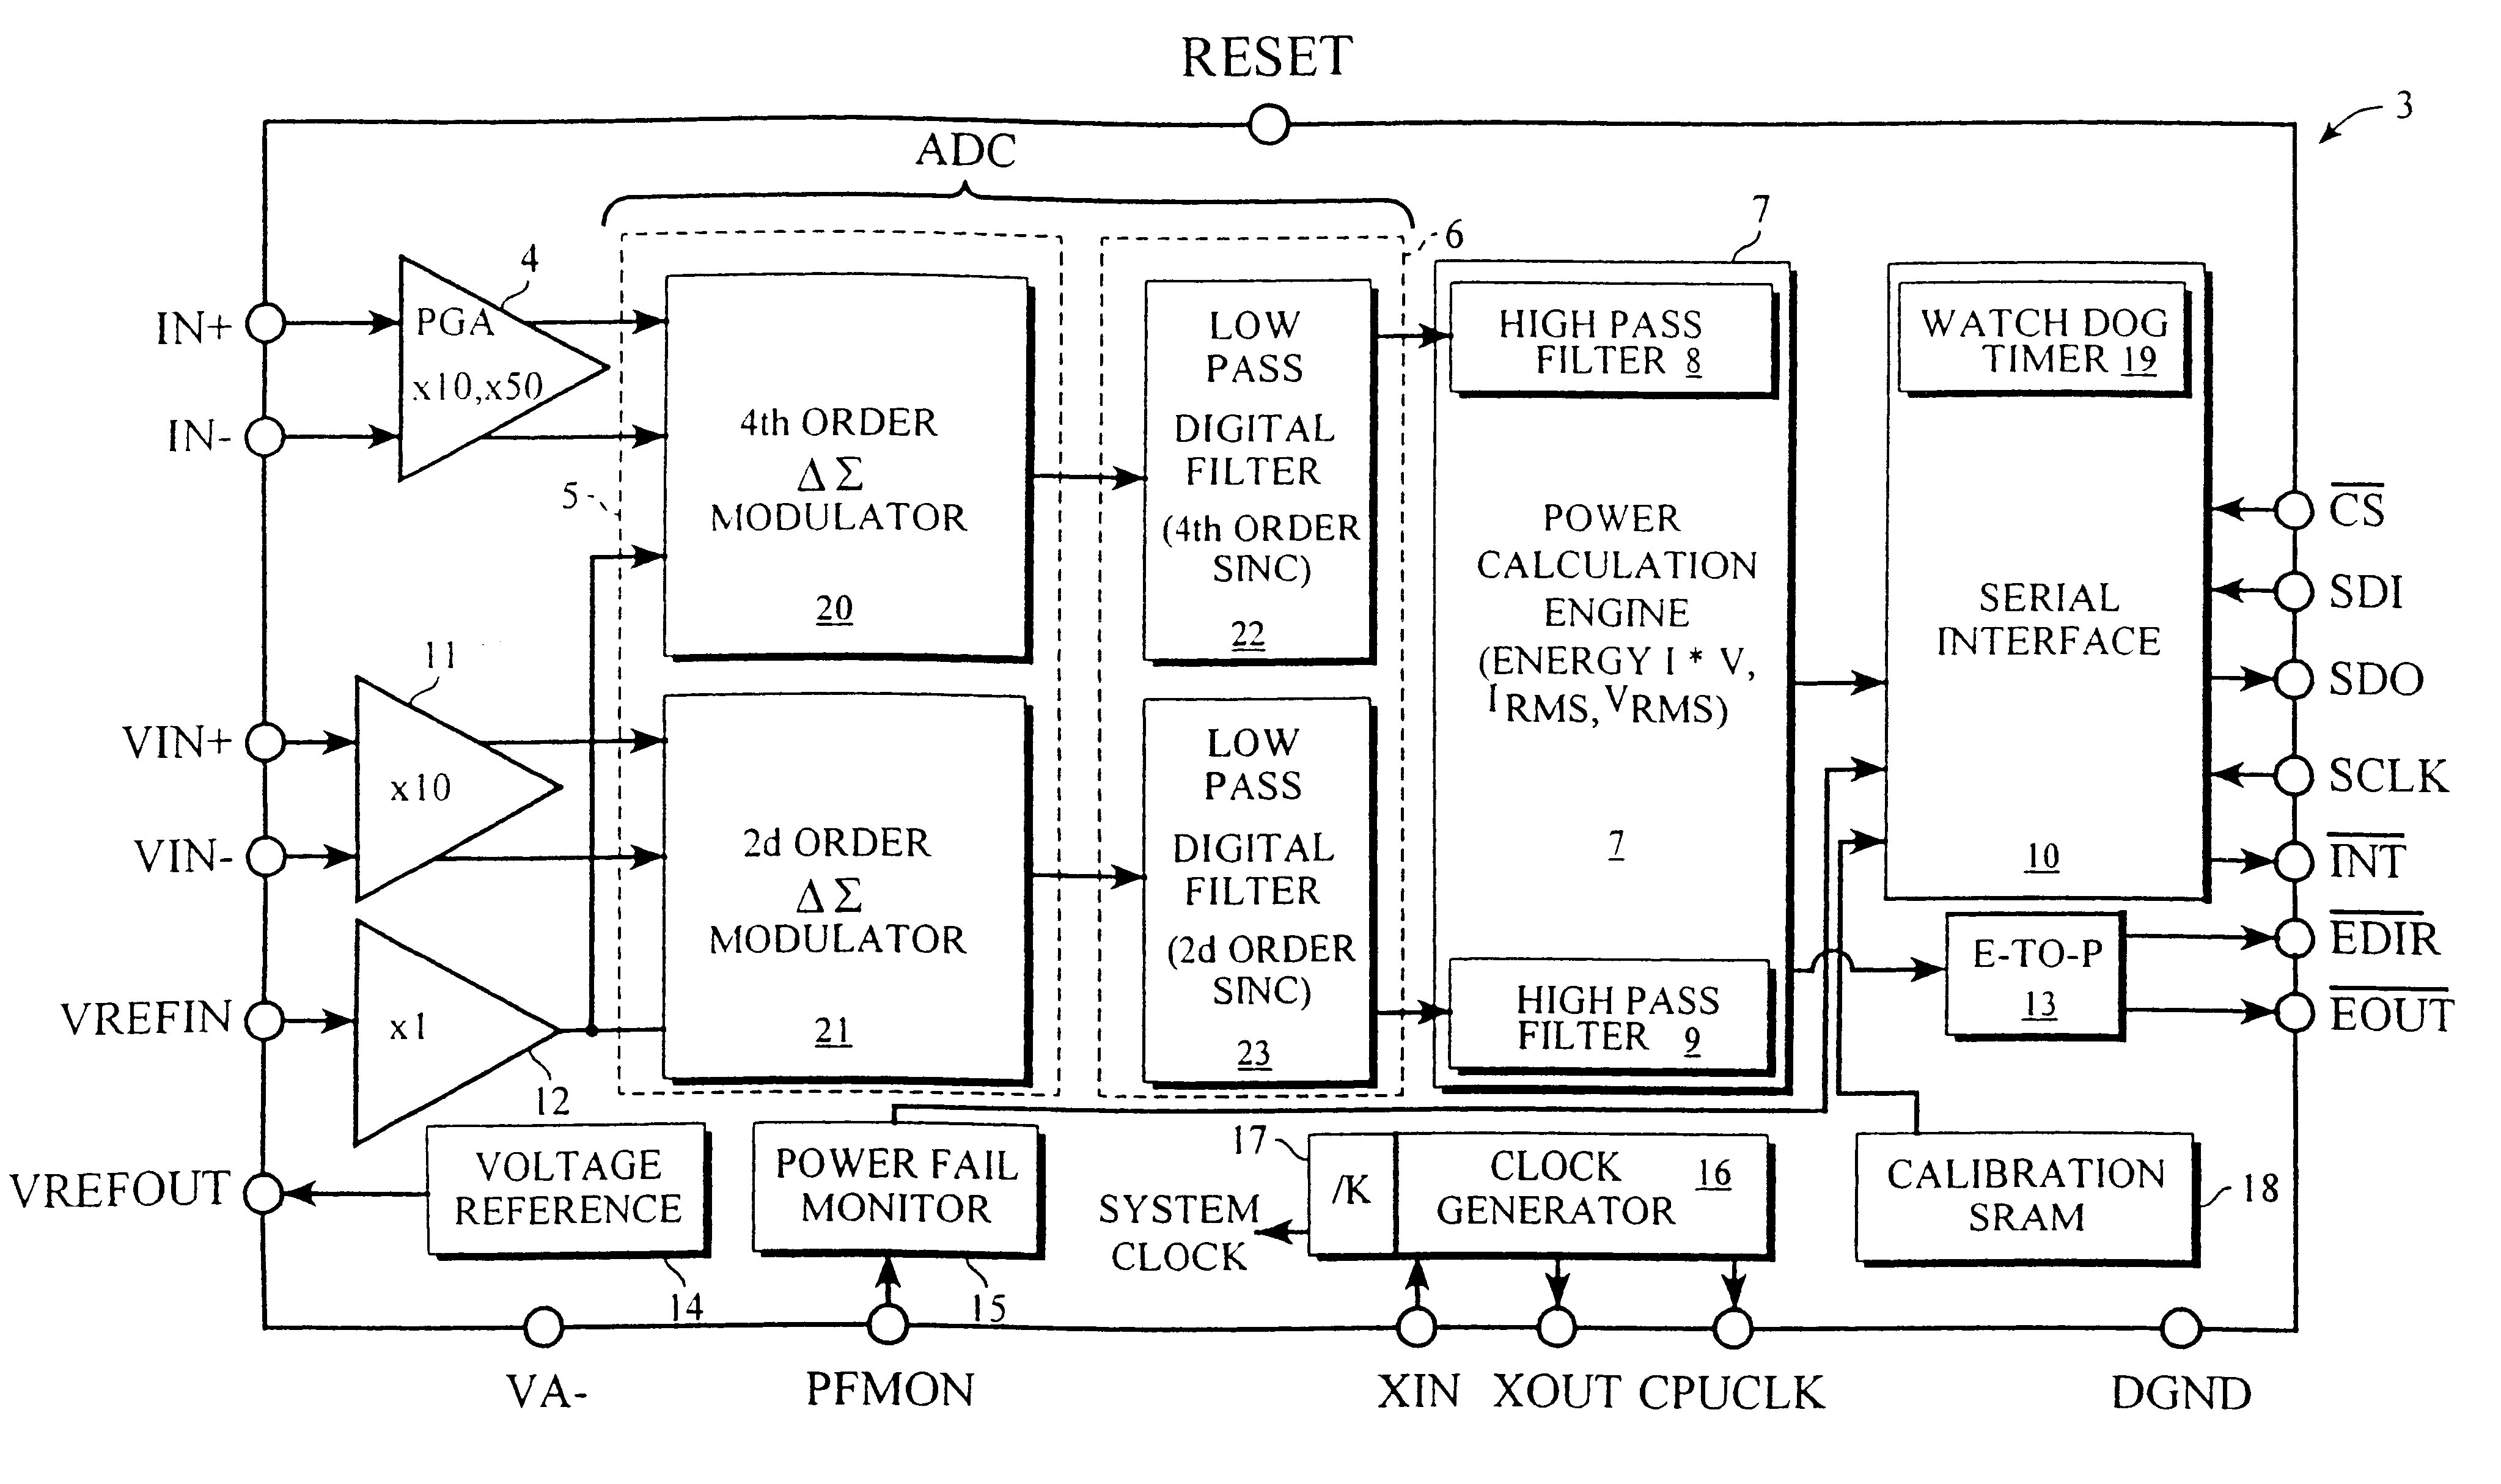 Single phase bi-directional electrical measurement systems and methods using ADCs